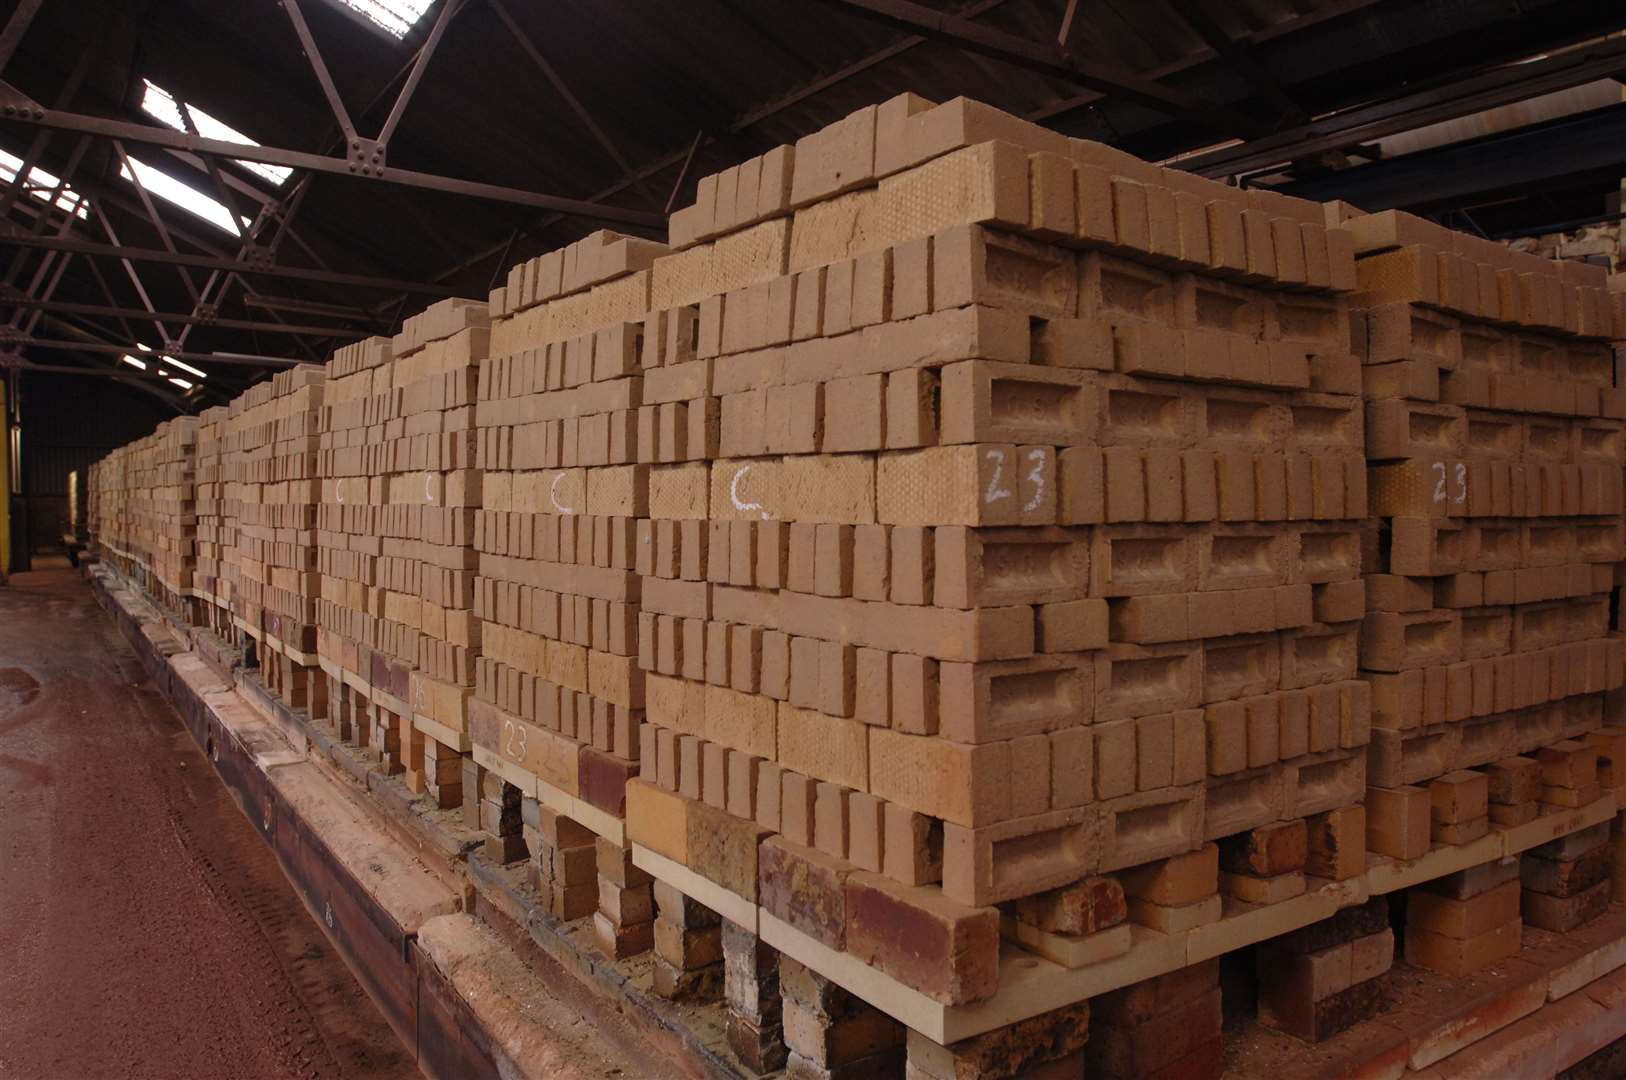 The brick industry blossomed during the mid to late 19th century in the county